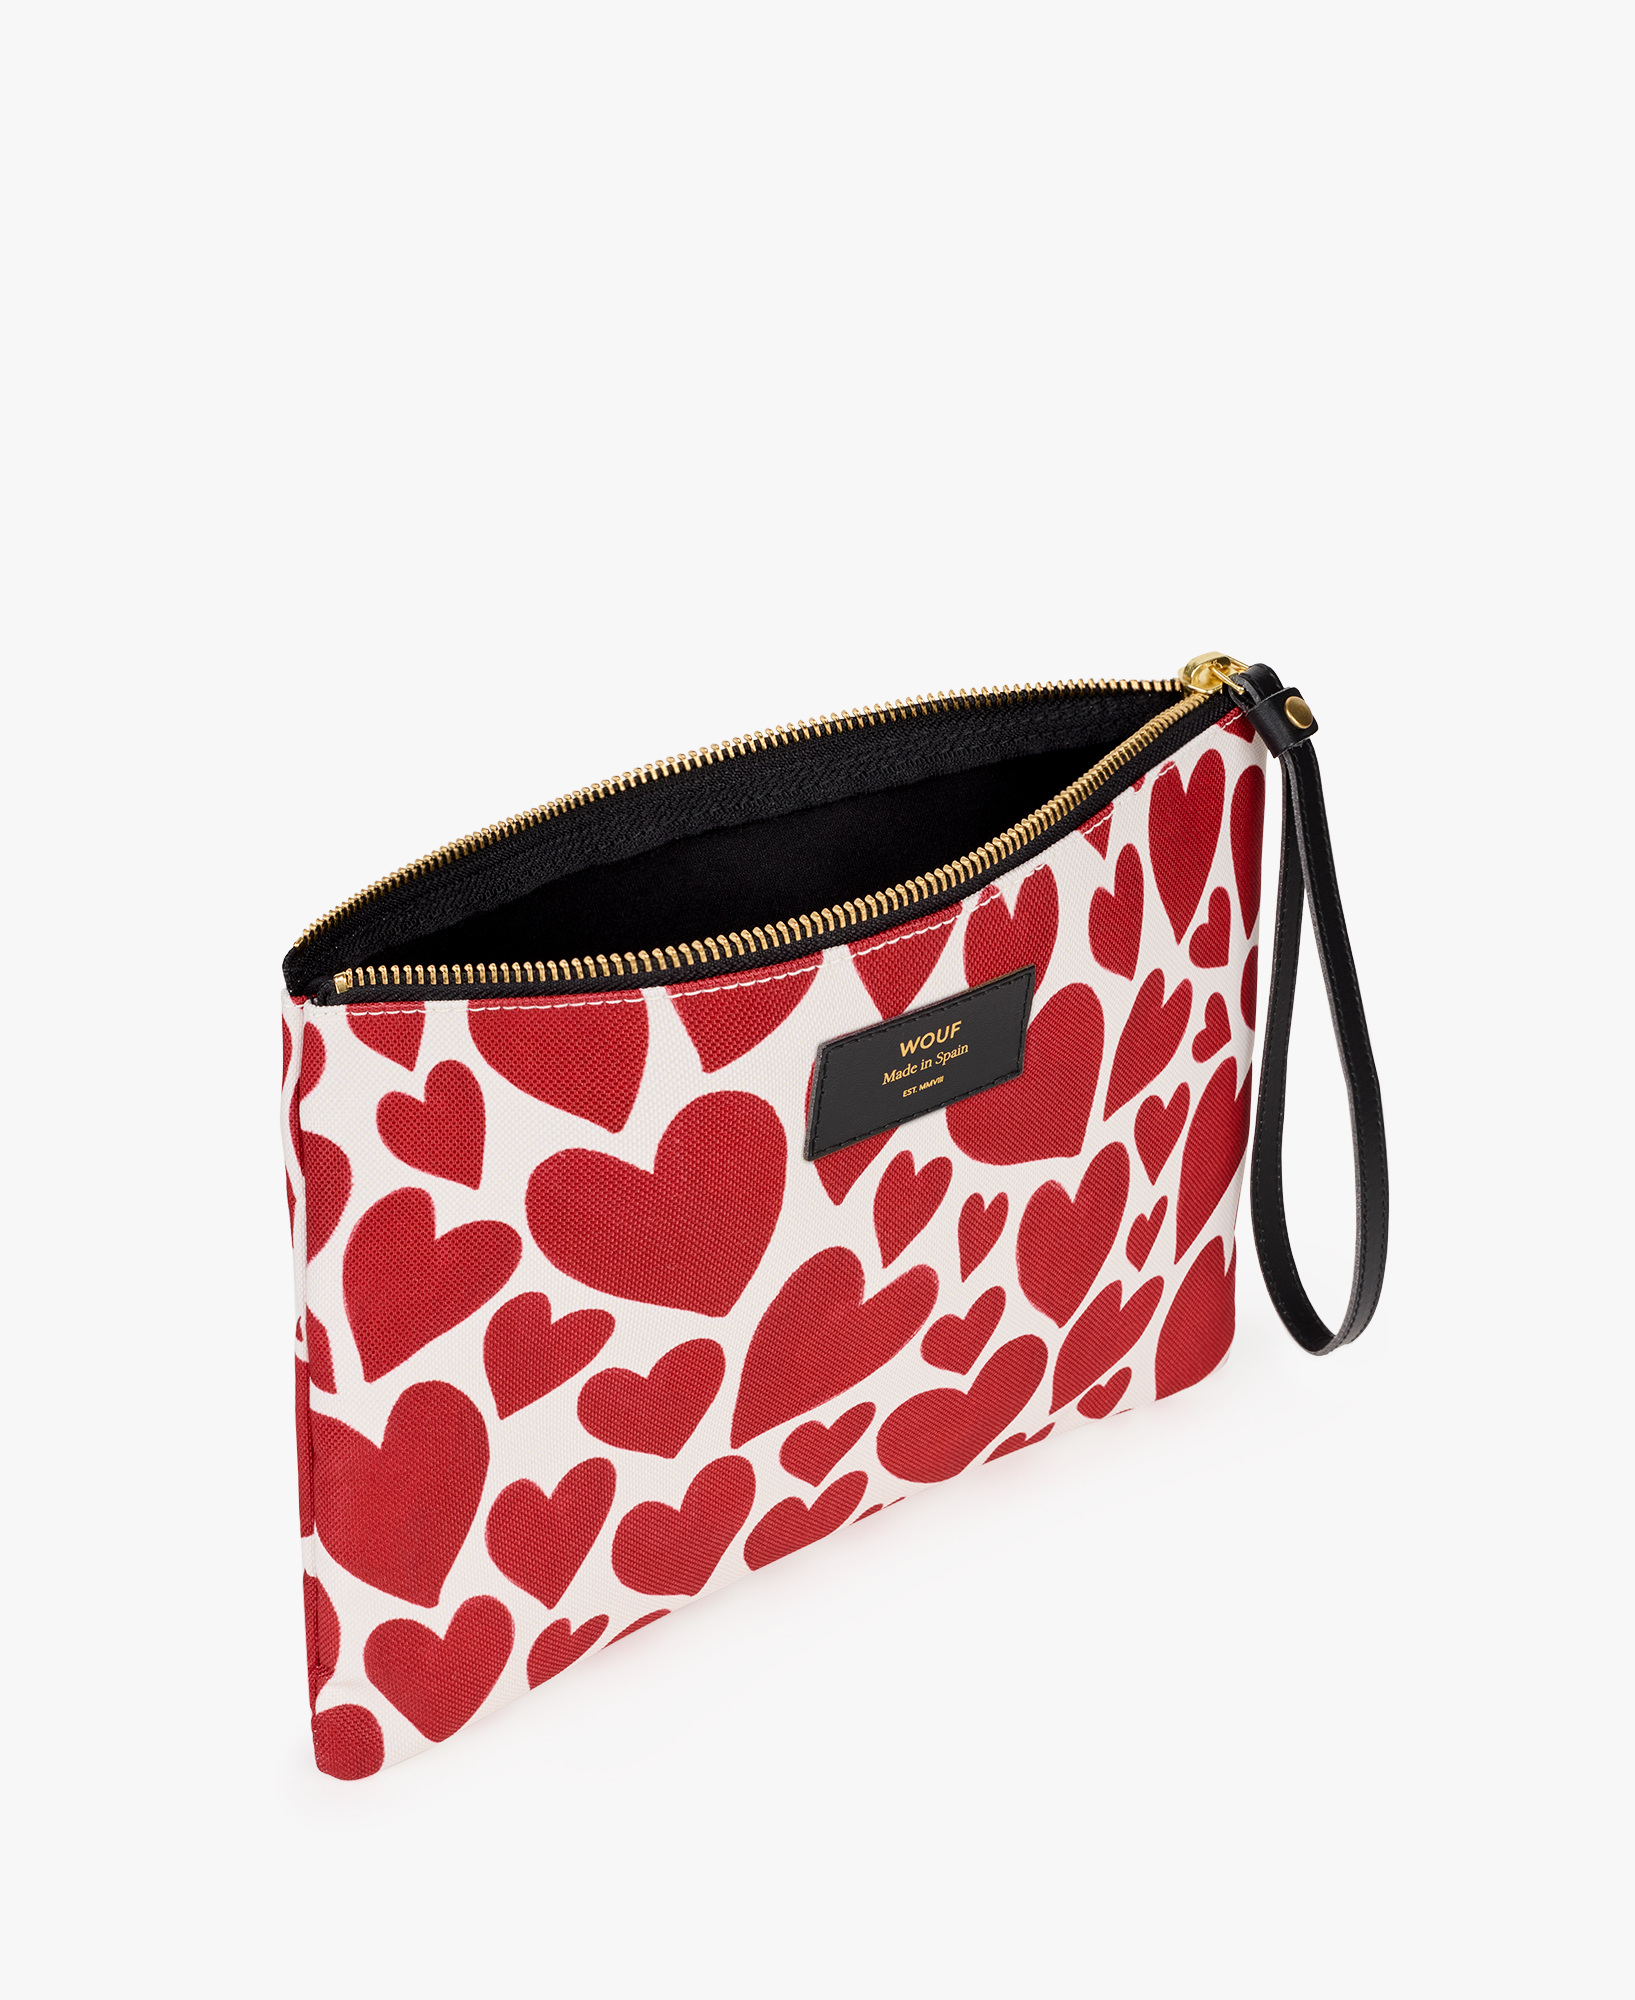 WOUF-XL-Pouch-Amour-Display